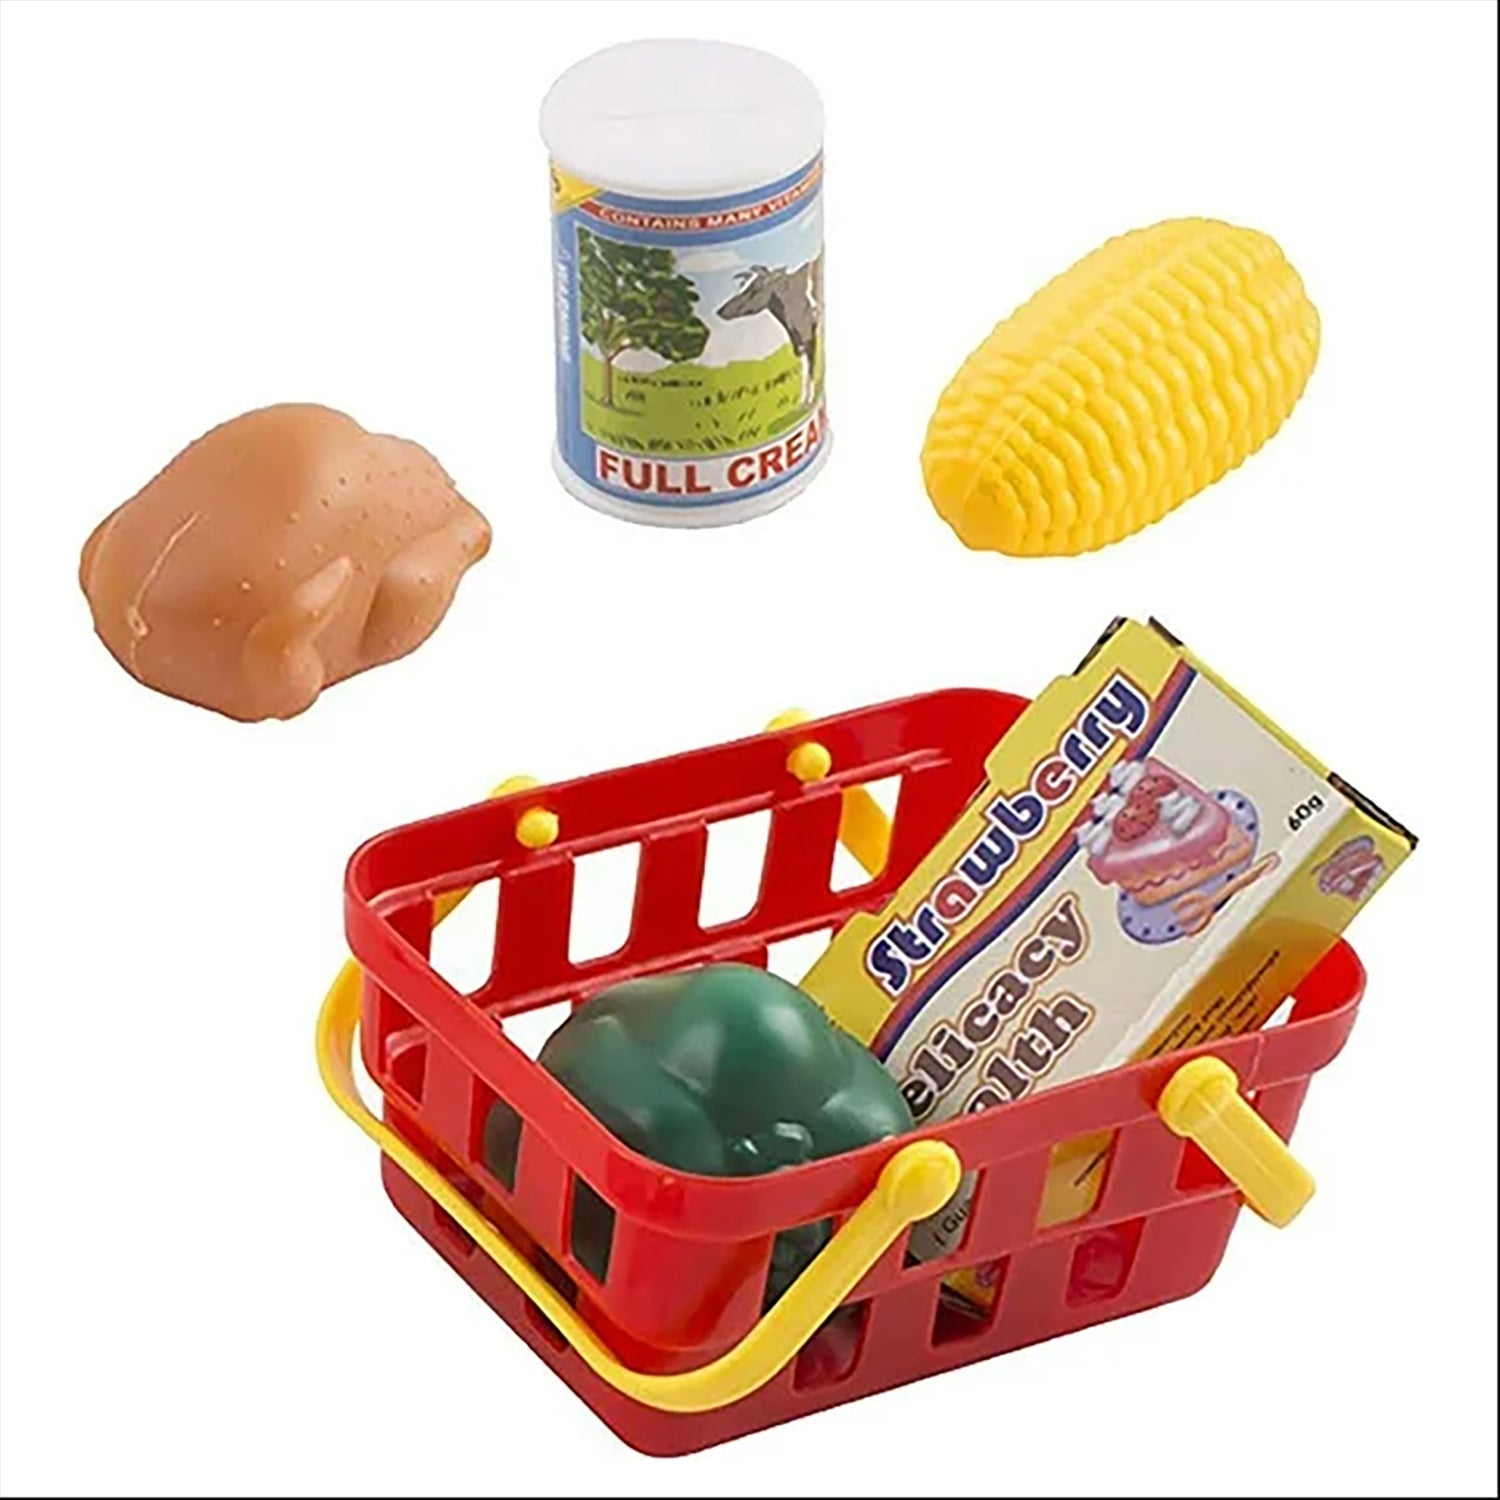 White & Red Cash Register Toy by The Magic Toy Shop - The Magic Toy Shop